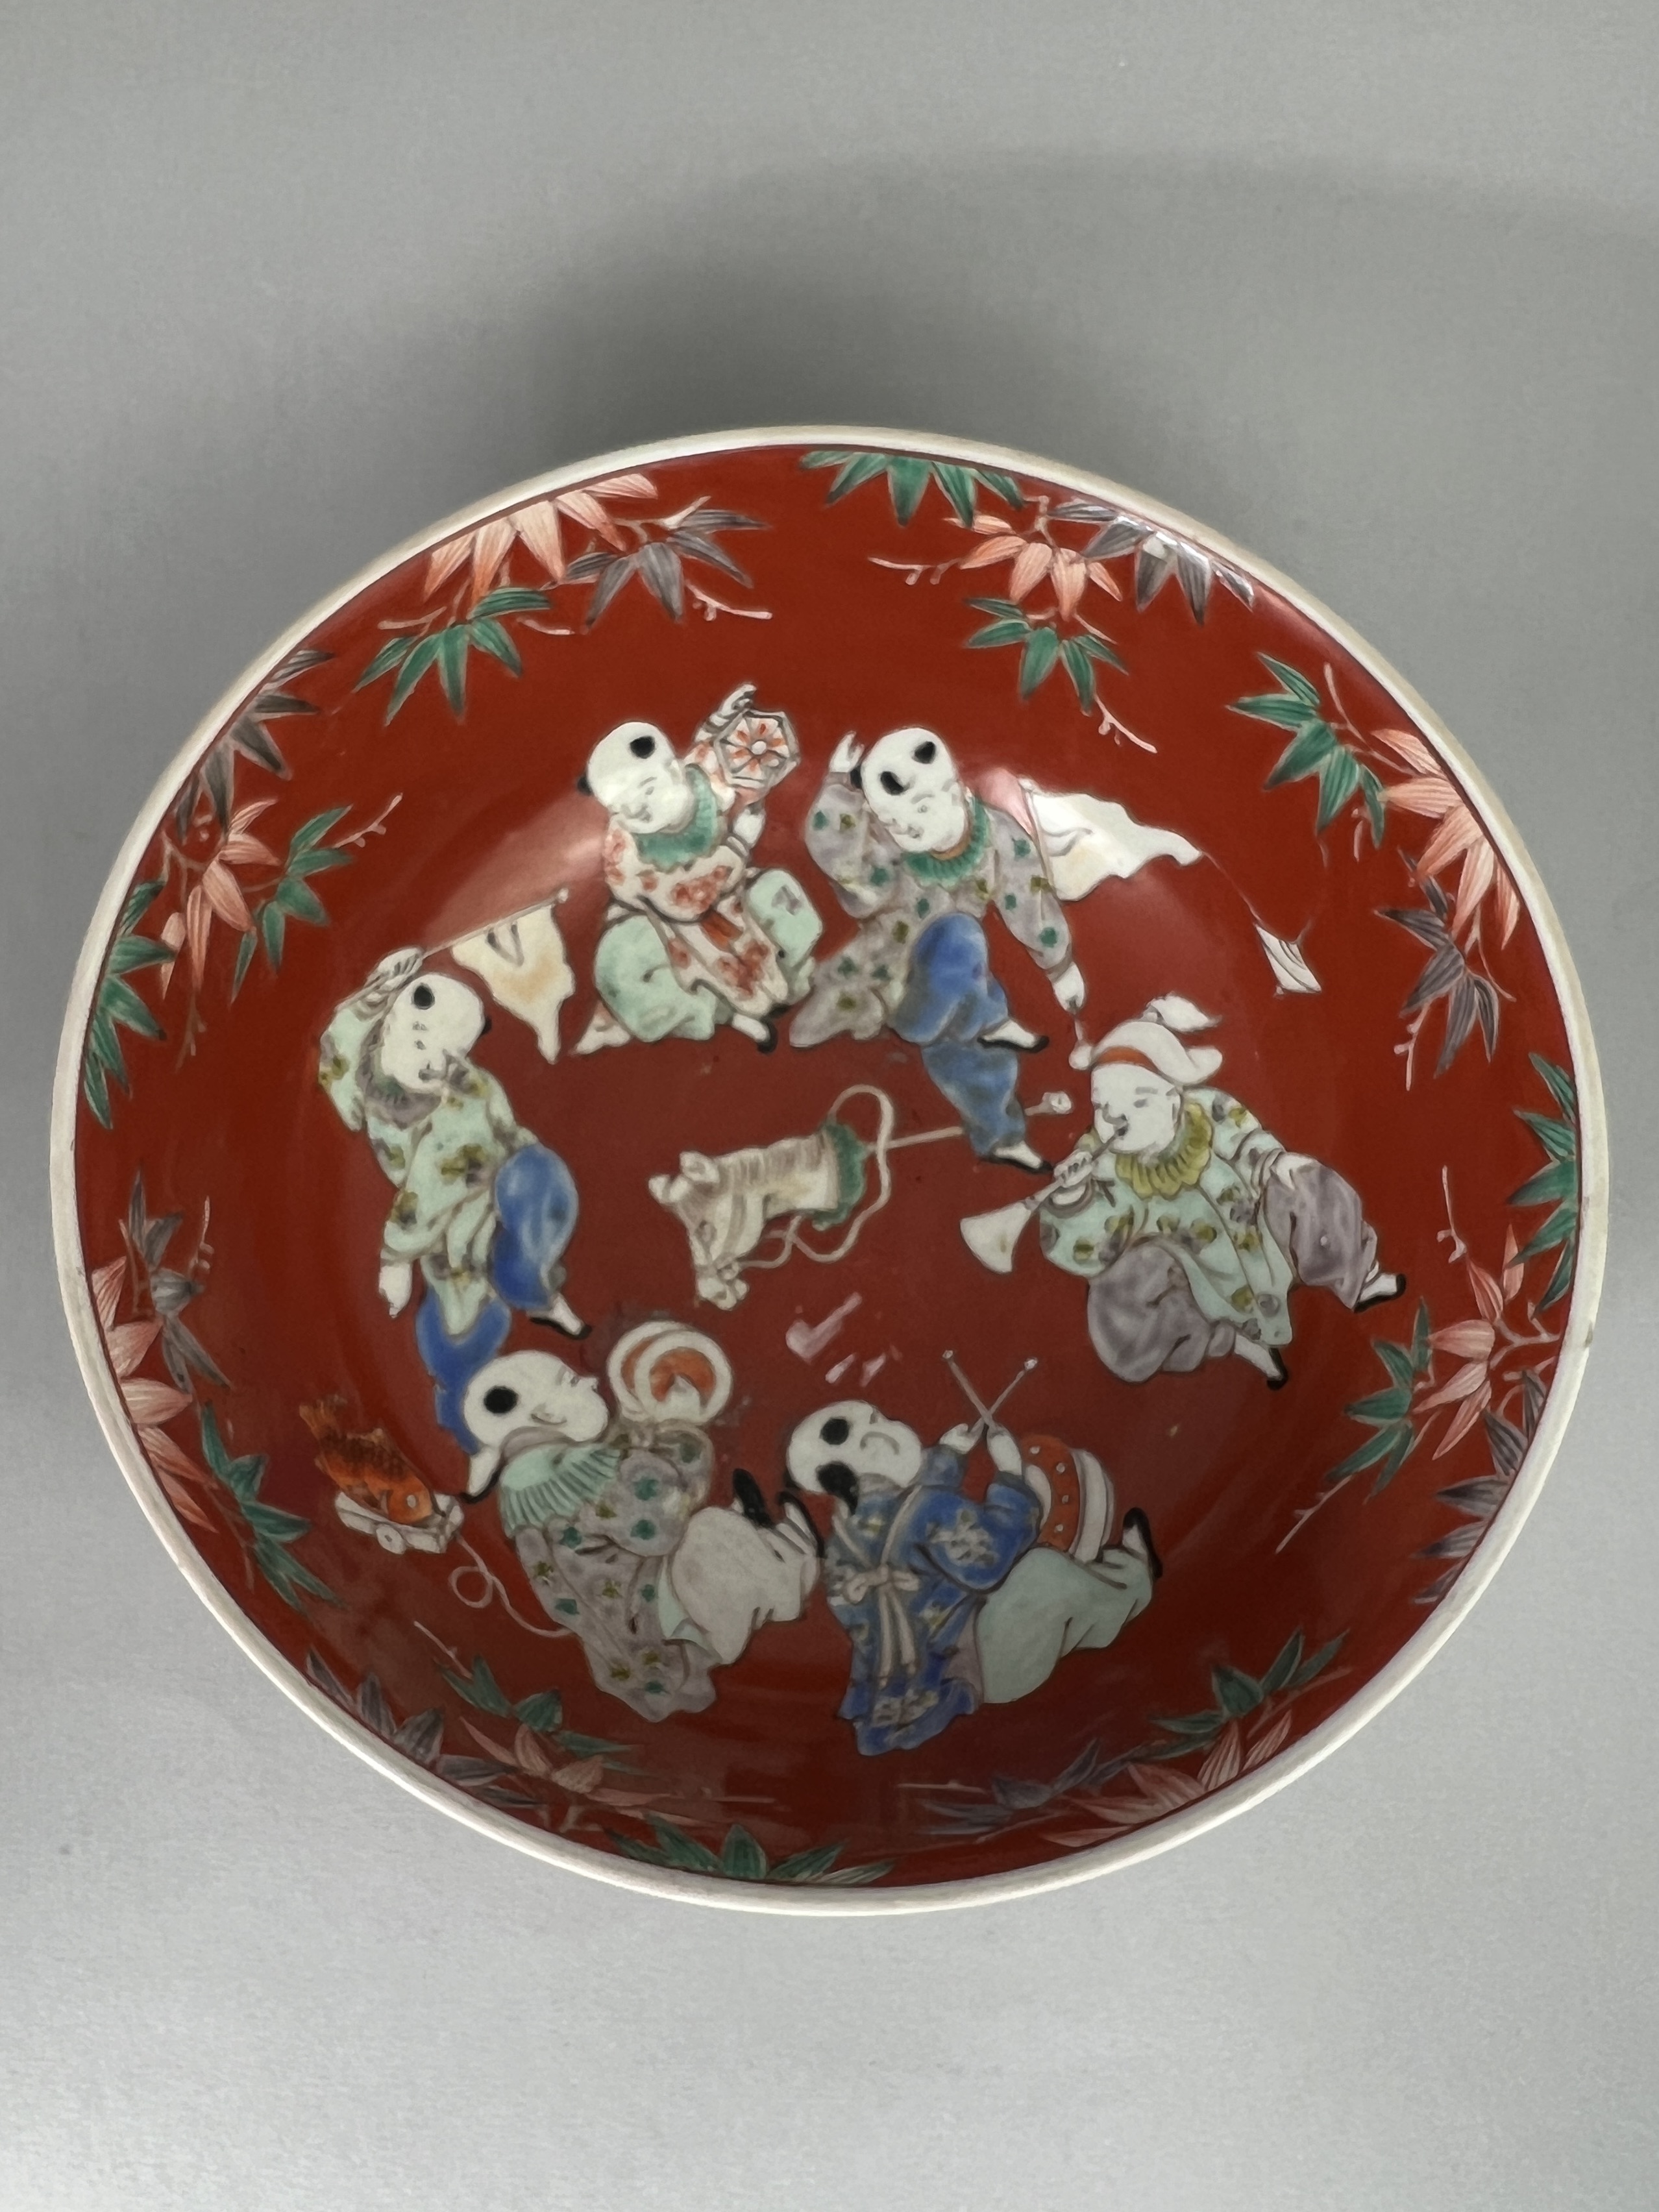 Four Japanese porcelain items, 19th centuryJapanese porcelain, 19th century, the four attractive - Image 14 of 23